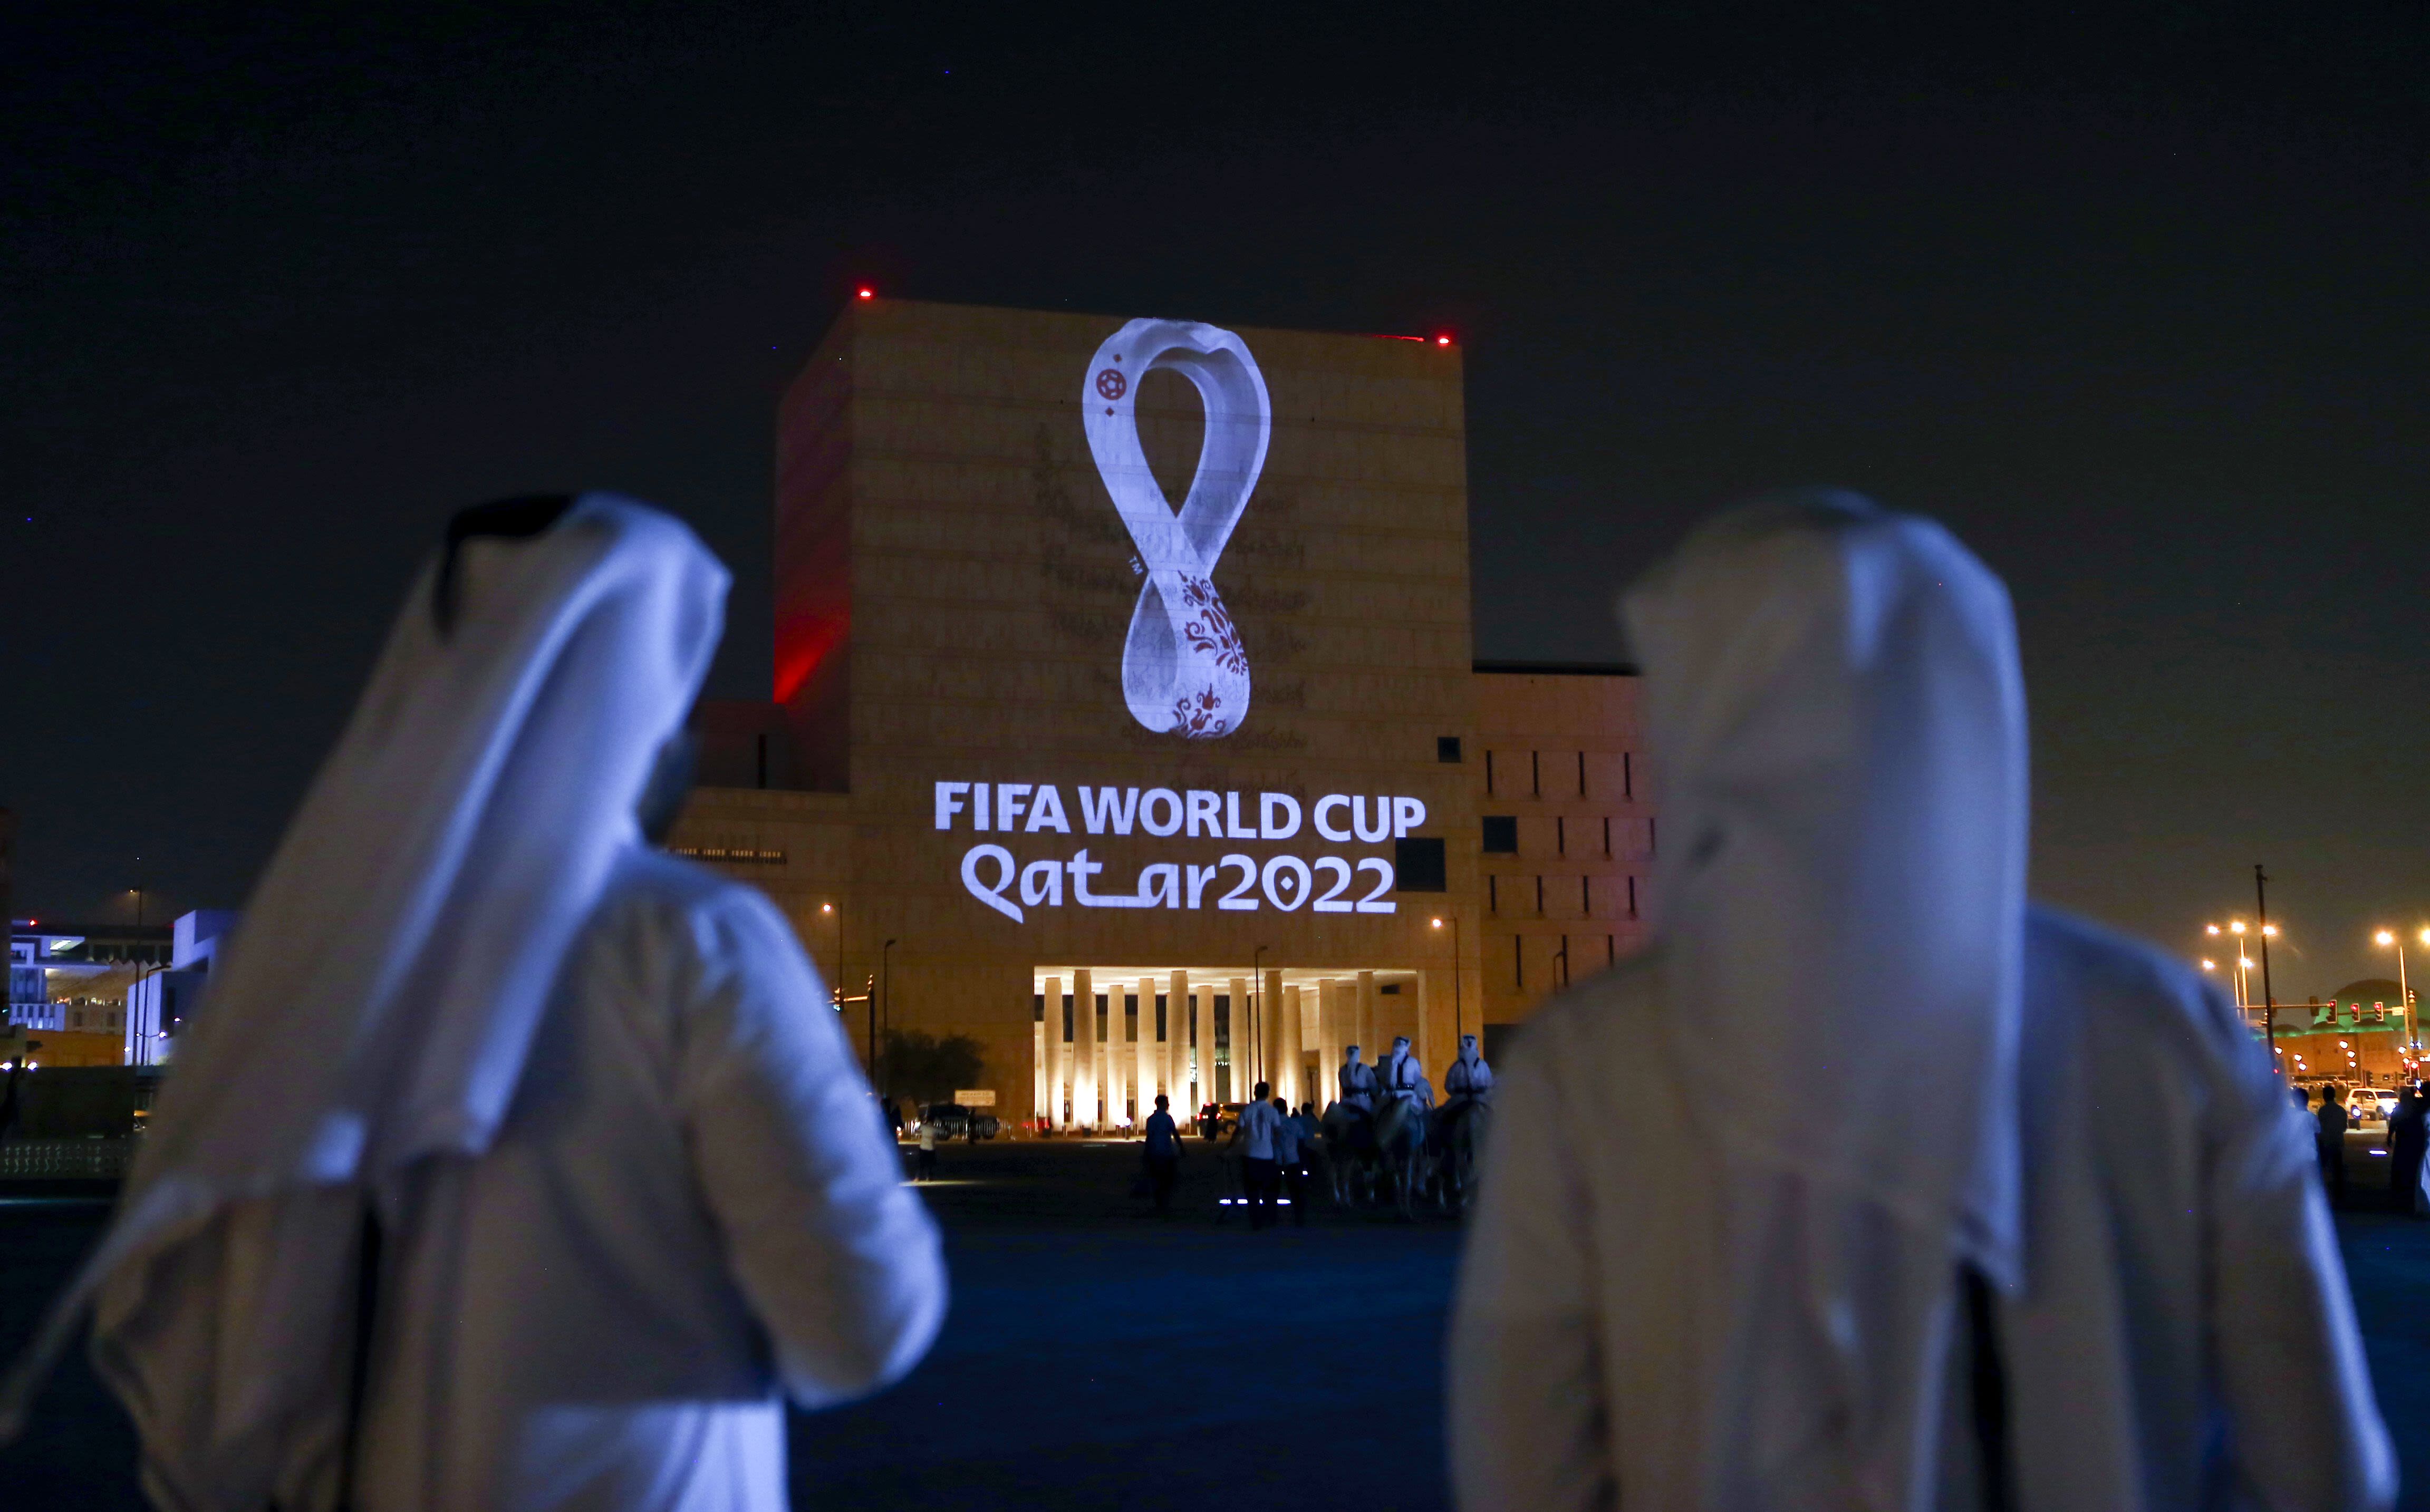 FIFA unveils the emblem for the 2022 World Cup in Qatar